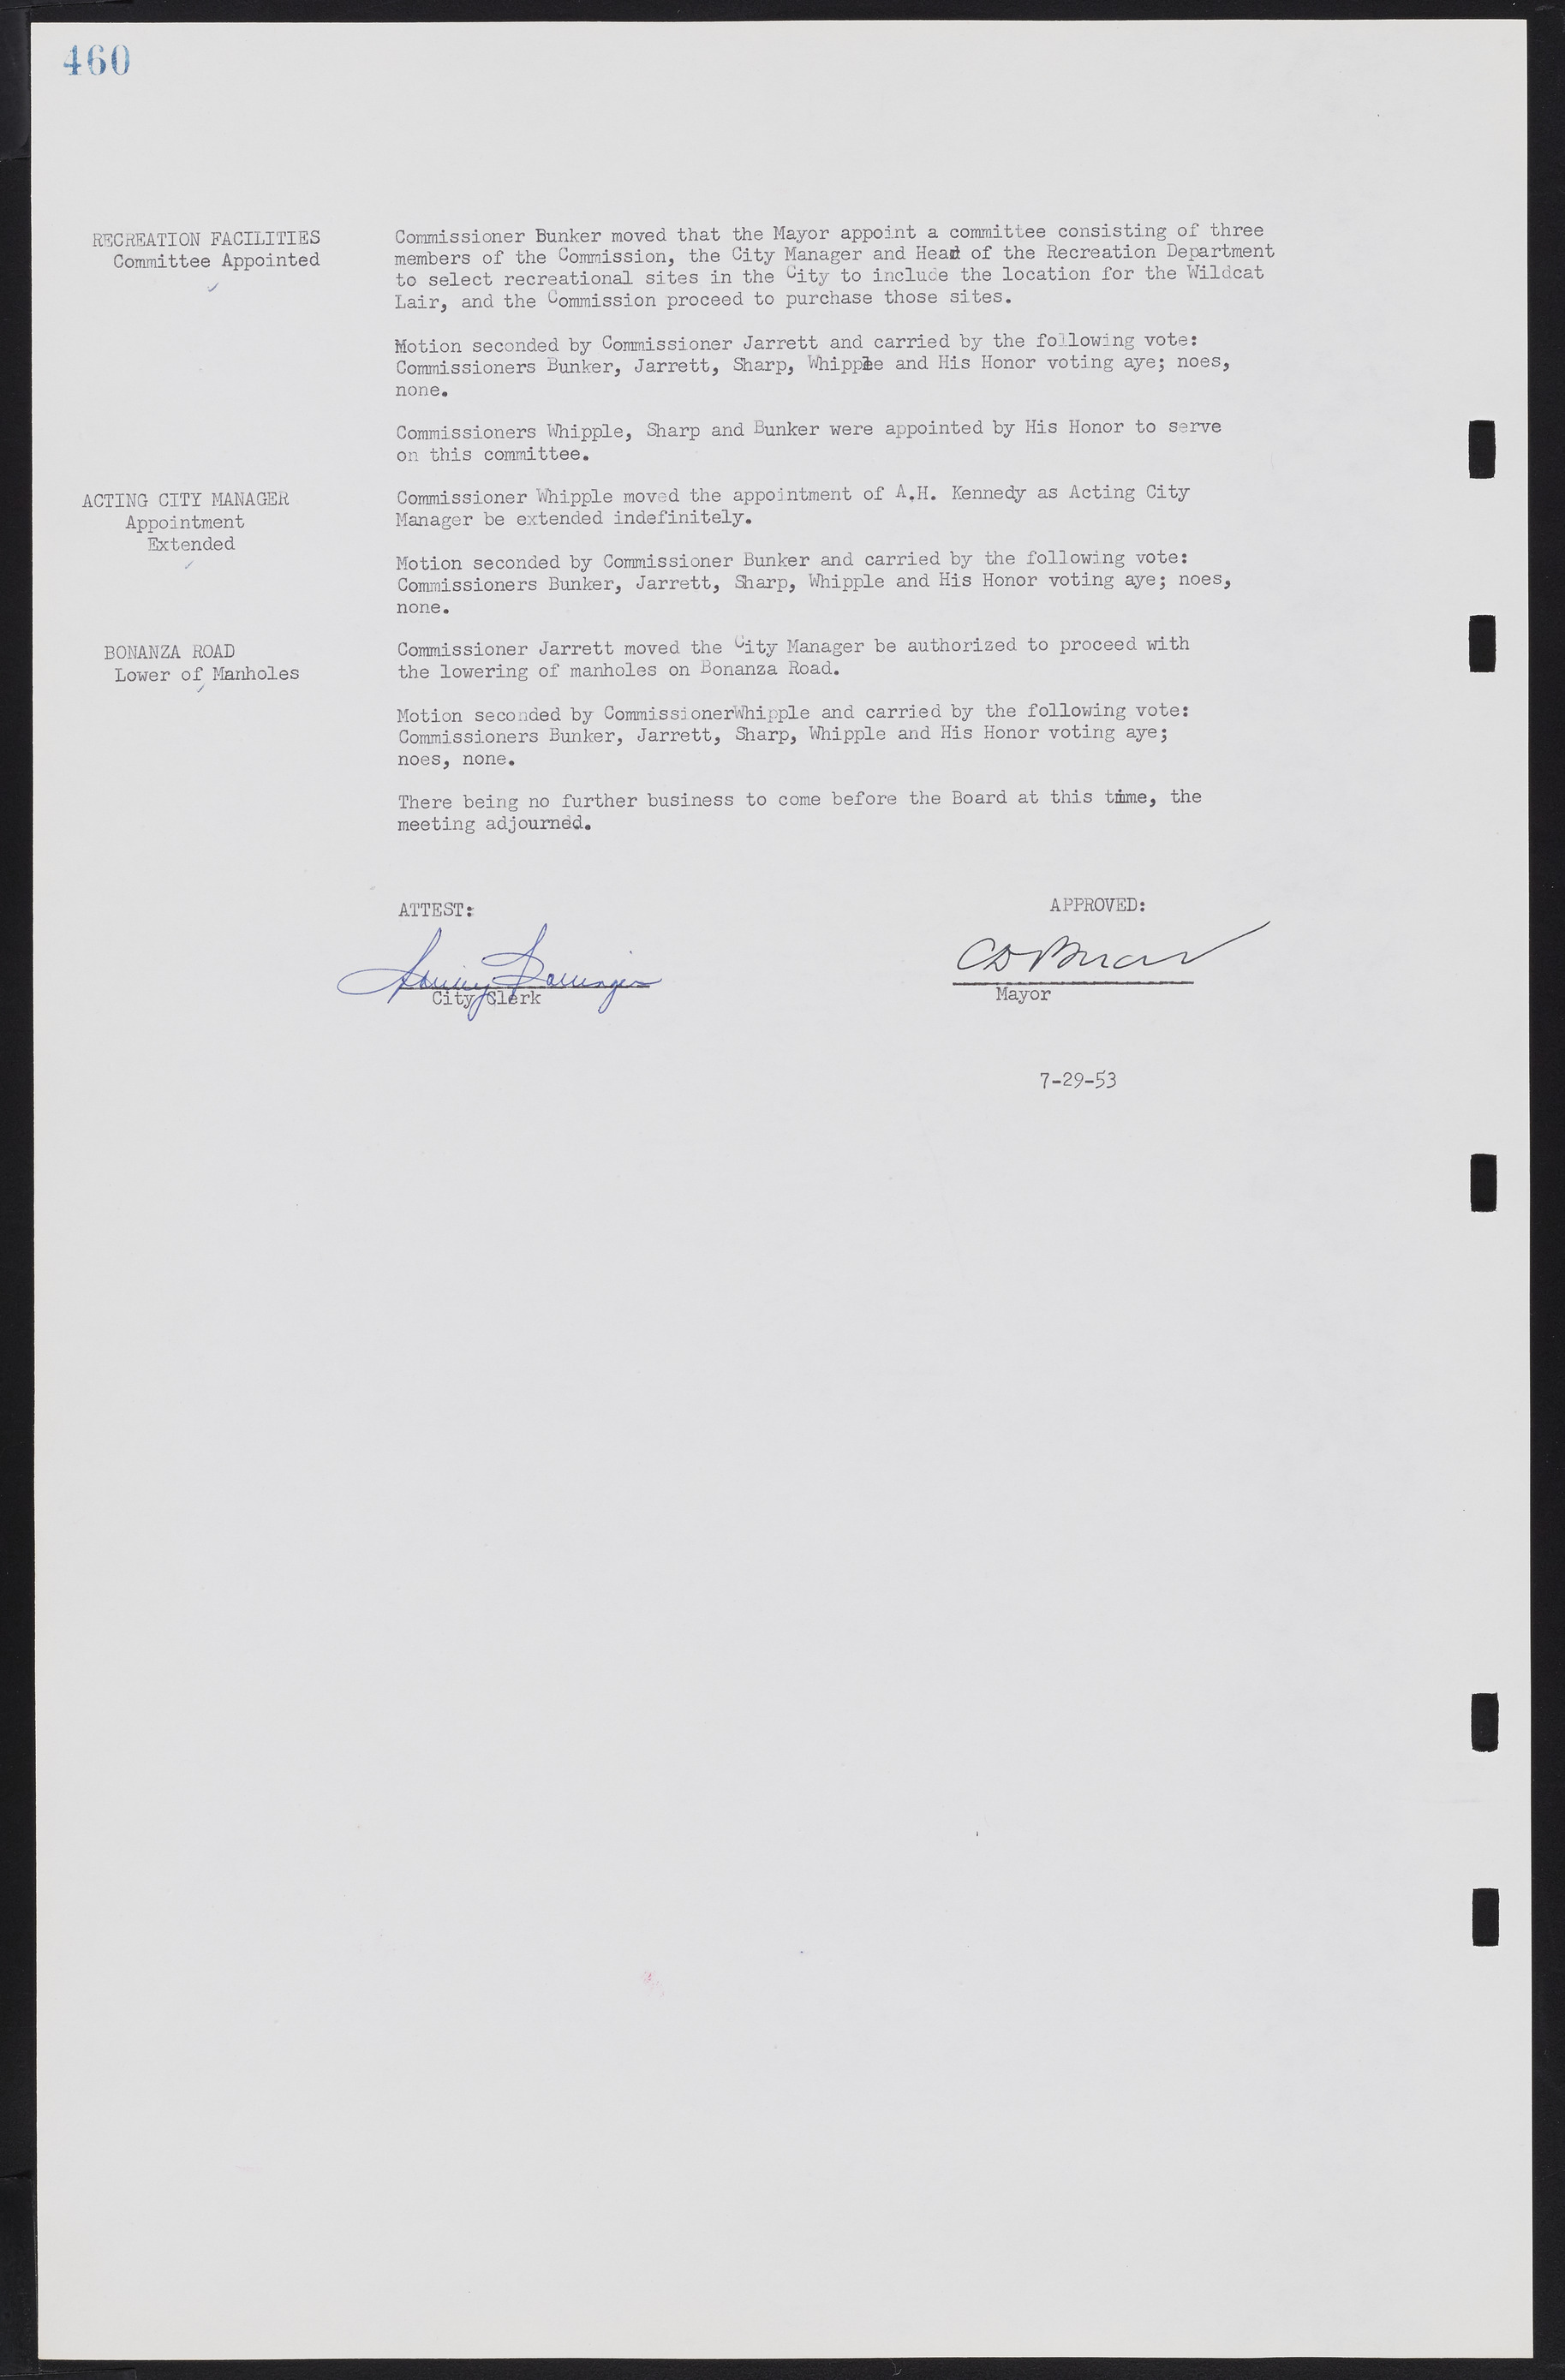 Las Vegas City Commission Minutes, May 26, 1952 to February 17, 1954, lvc000008-490